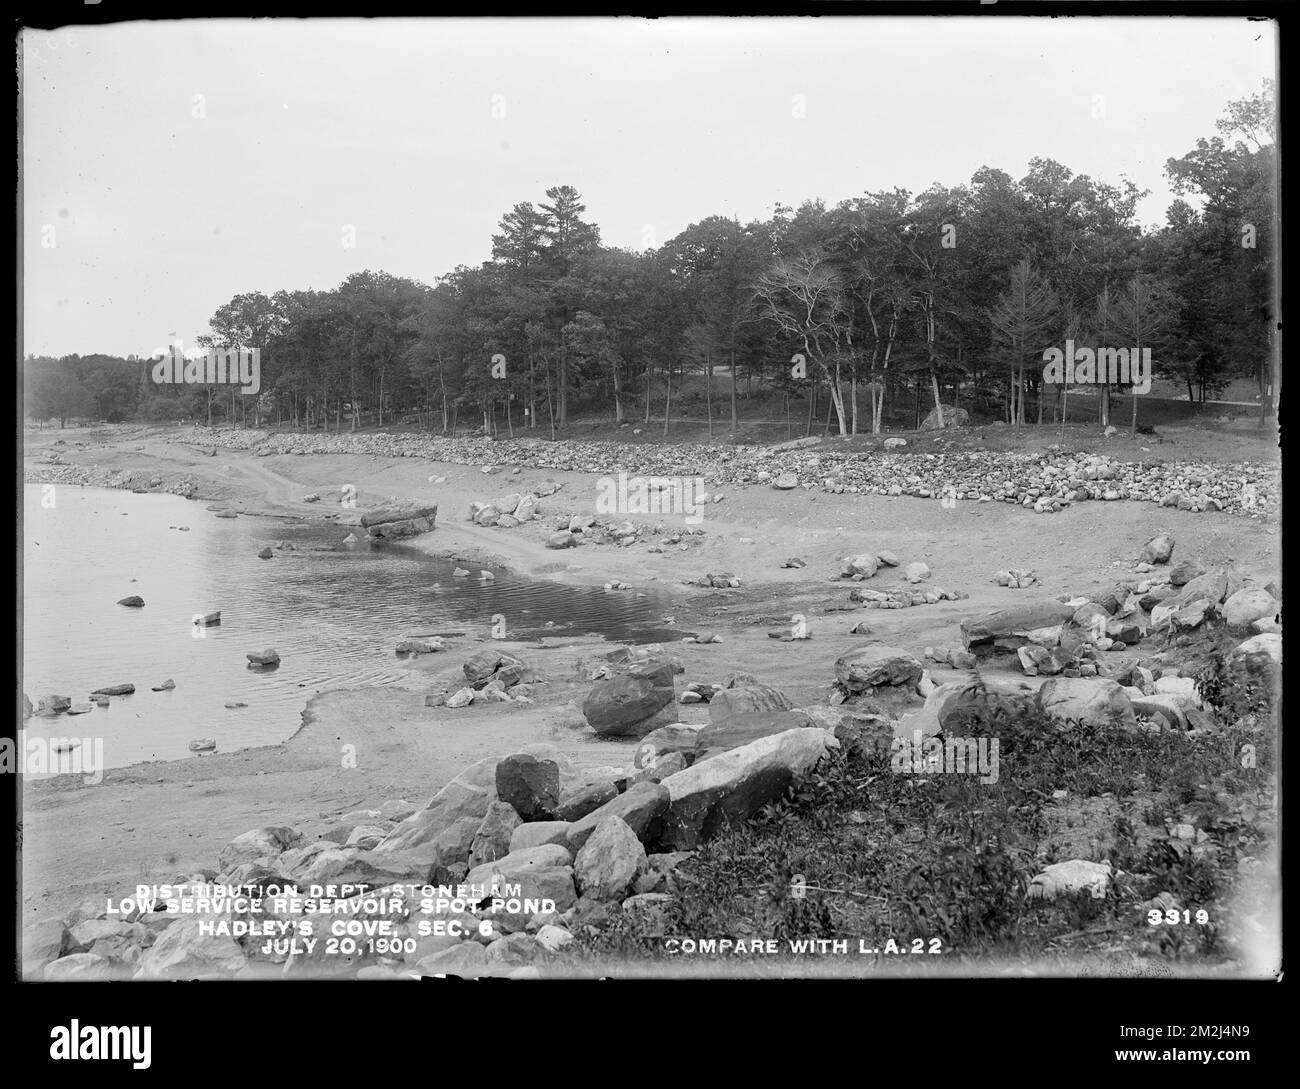 Distribution Department, Low Service Spot Pond Reservoir, vicinity of Hadley Cove, Section 6 (compare with Landscape Architects' photograph No. 22), Stoneham, Mass., Jul. 20, 1900 , waterworks, reservoirs water distribution structures, construction sites Stock Photo